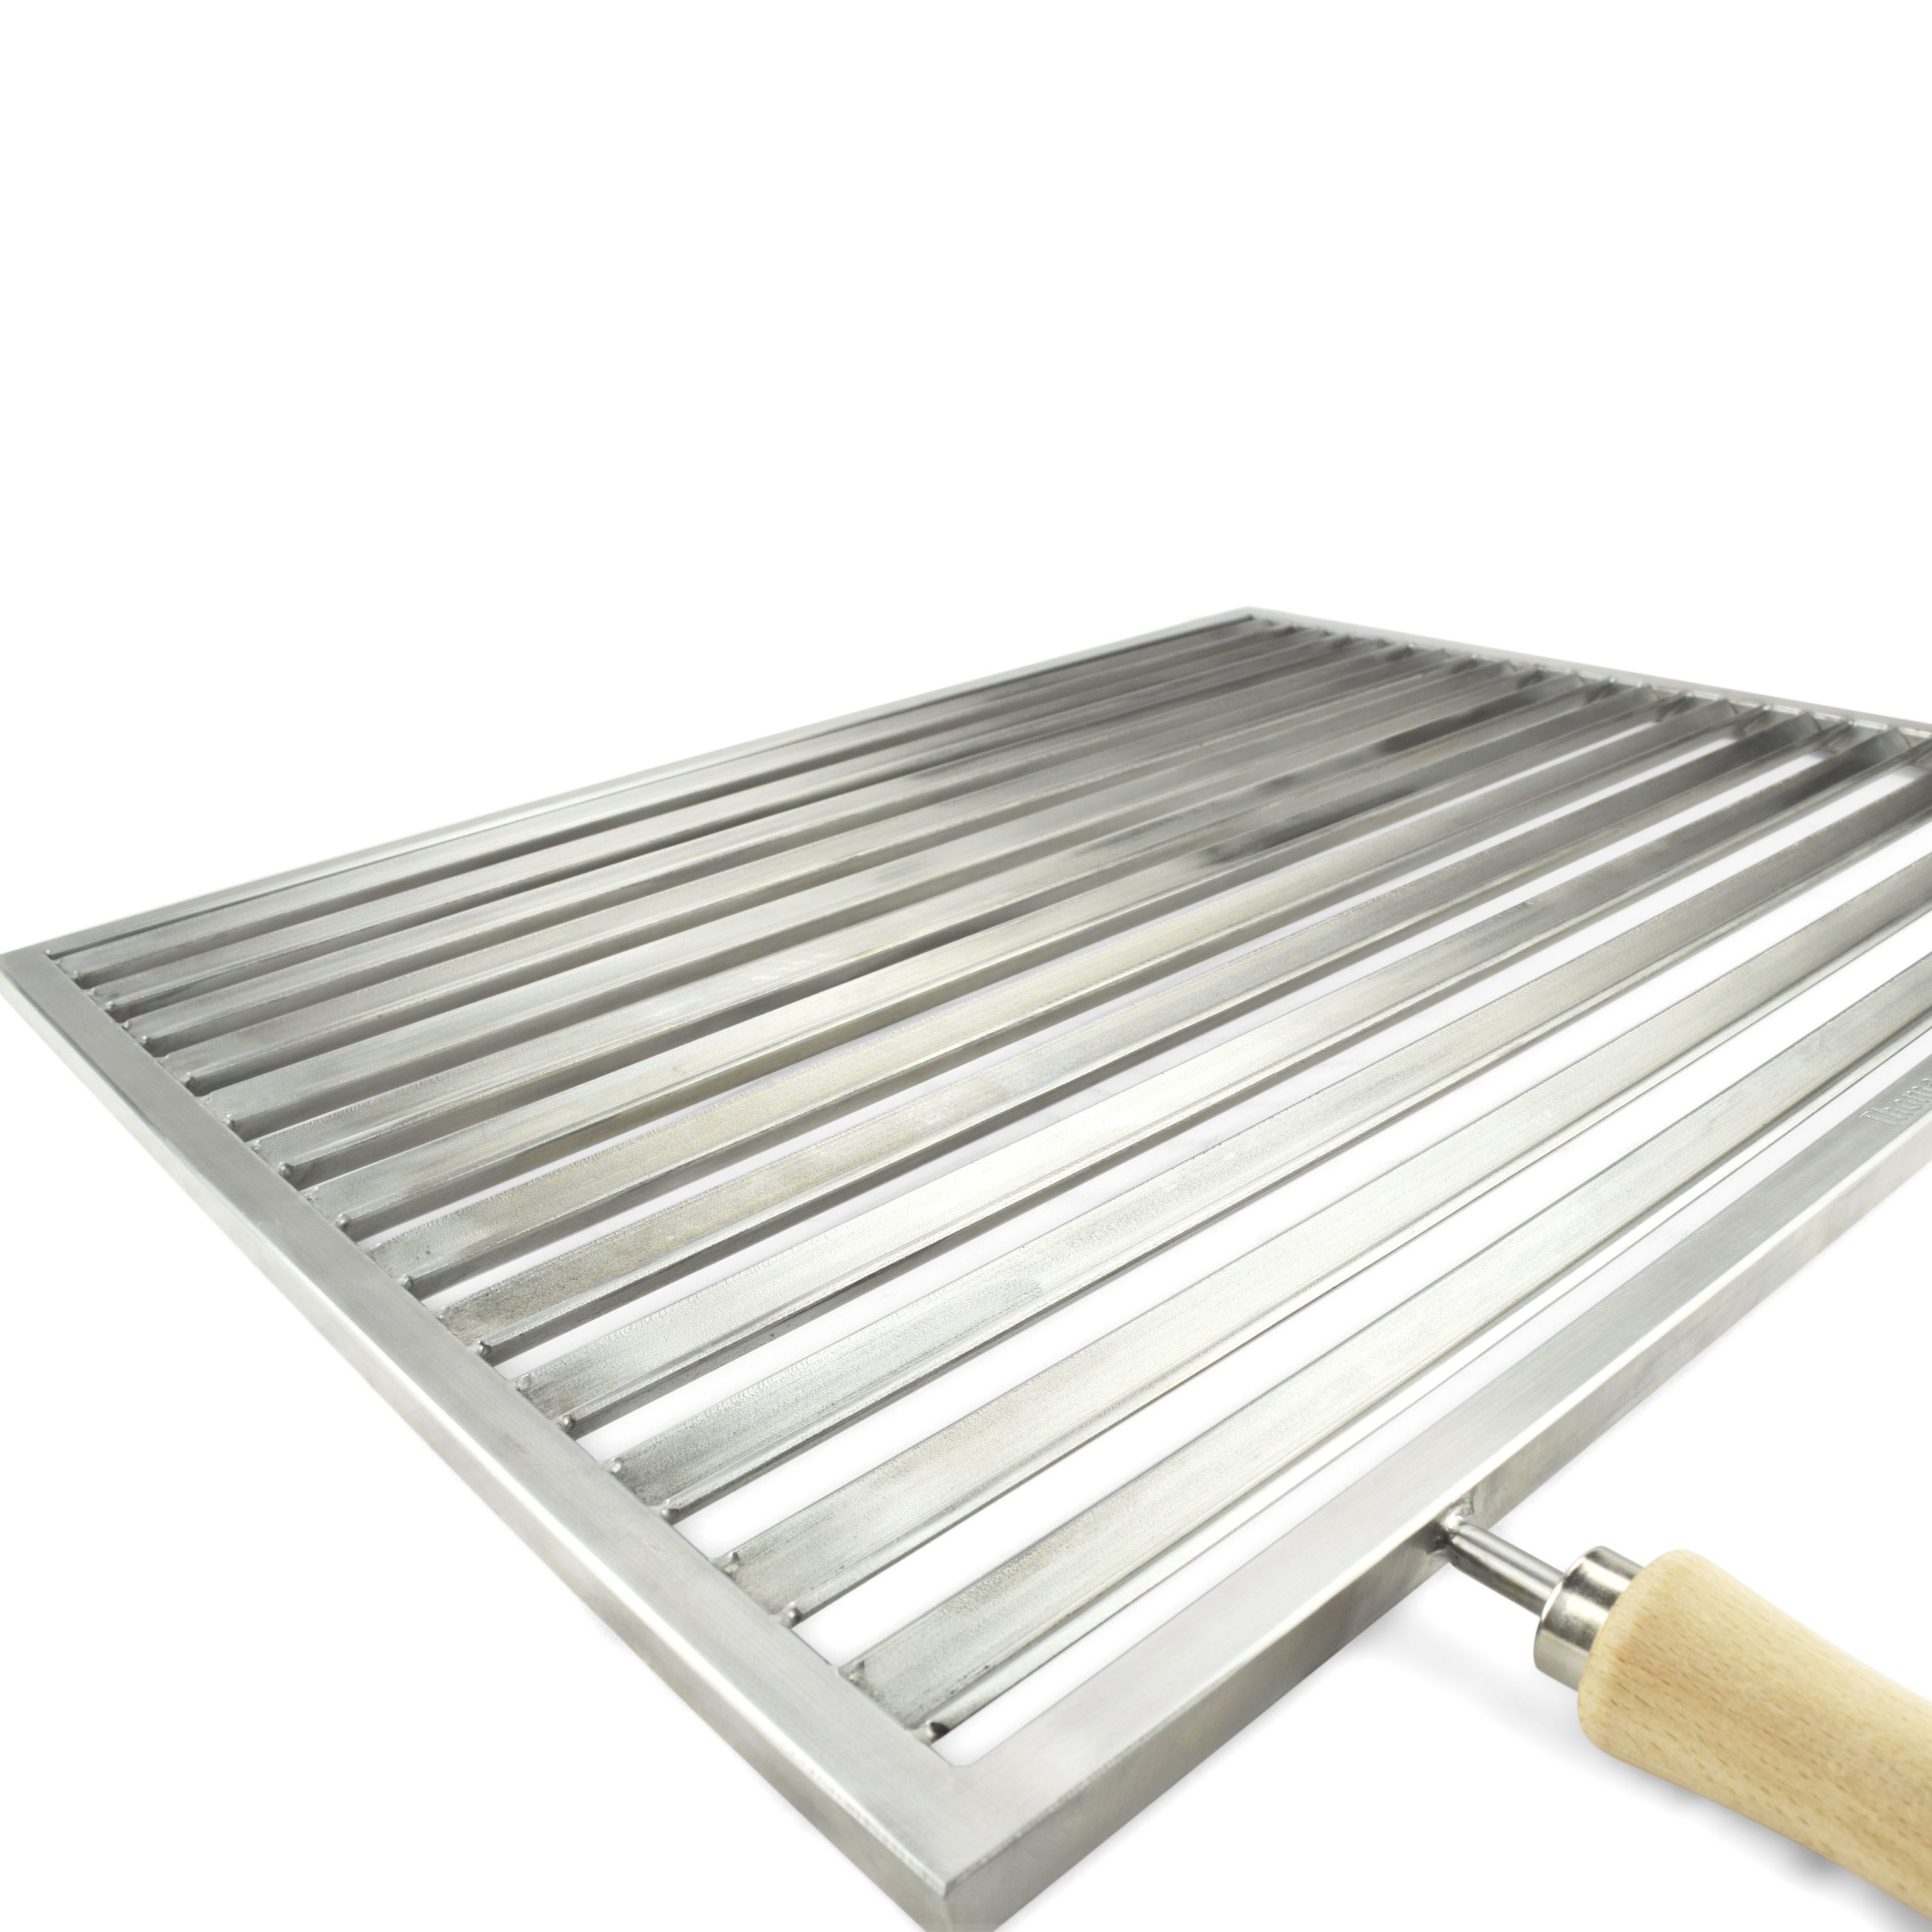 Barbecue grill made to measure ECKIG Model ARGENTINA in stainless steel